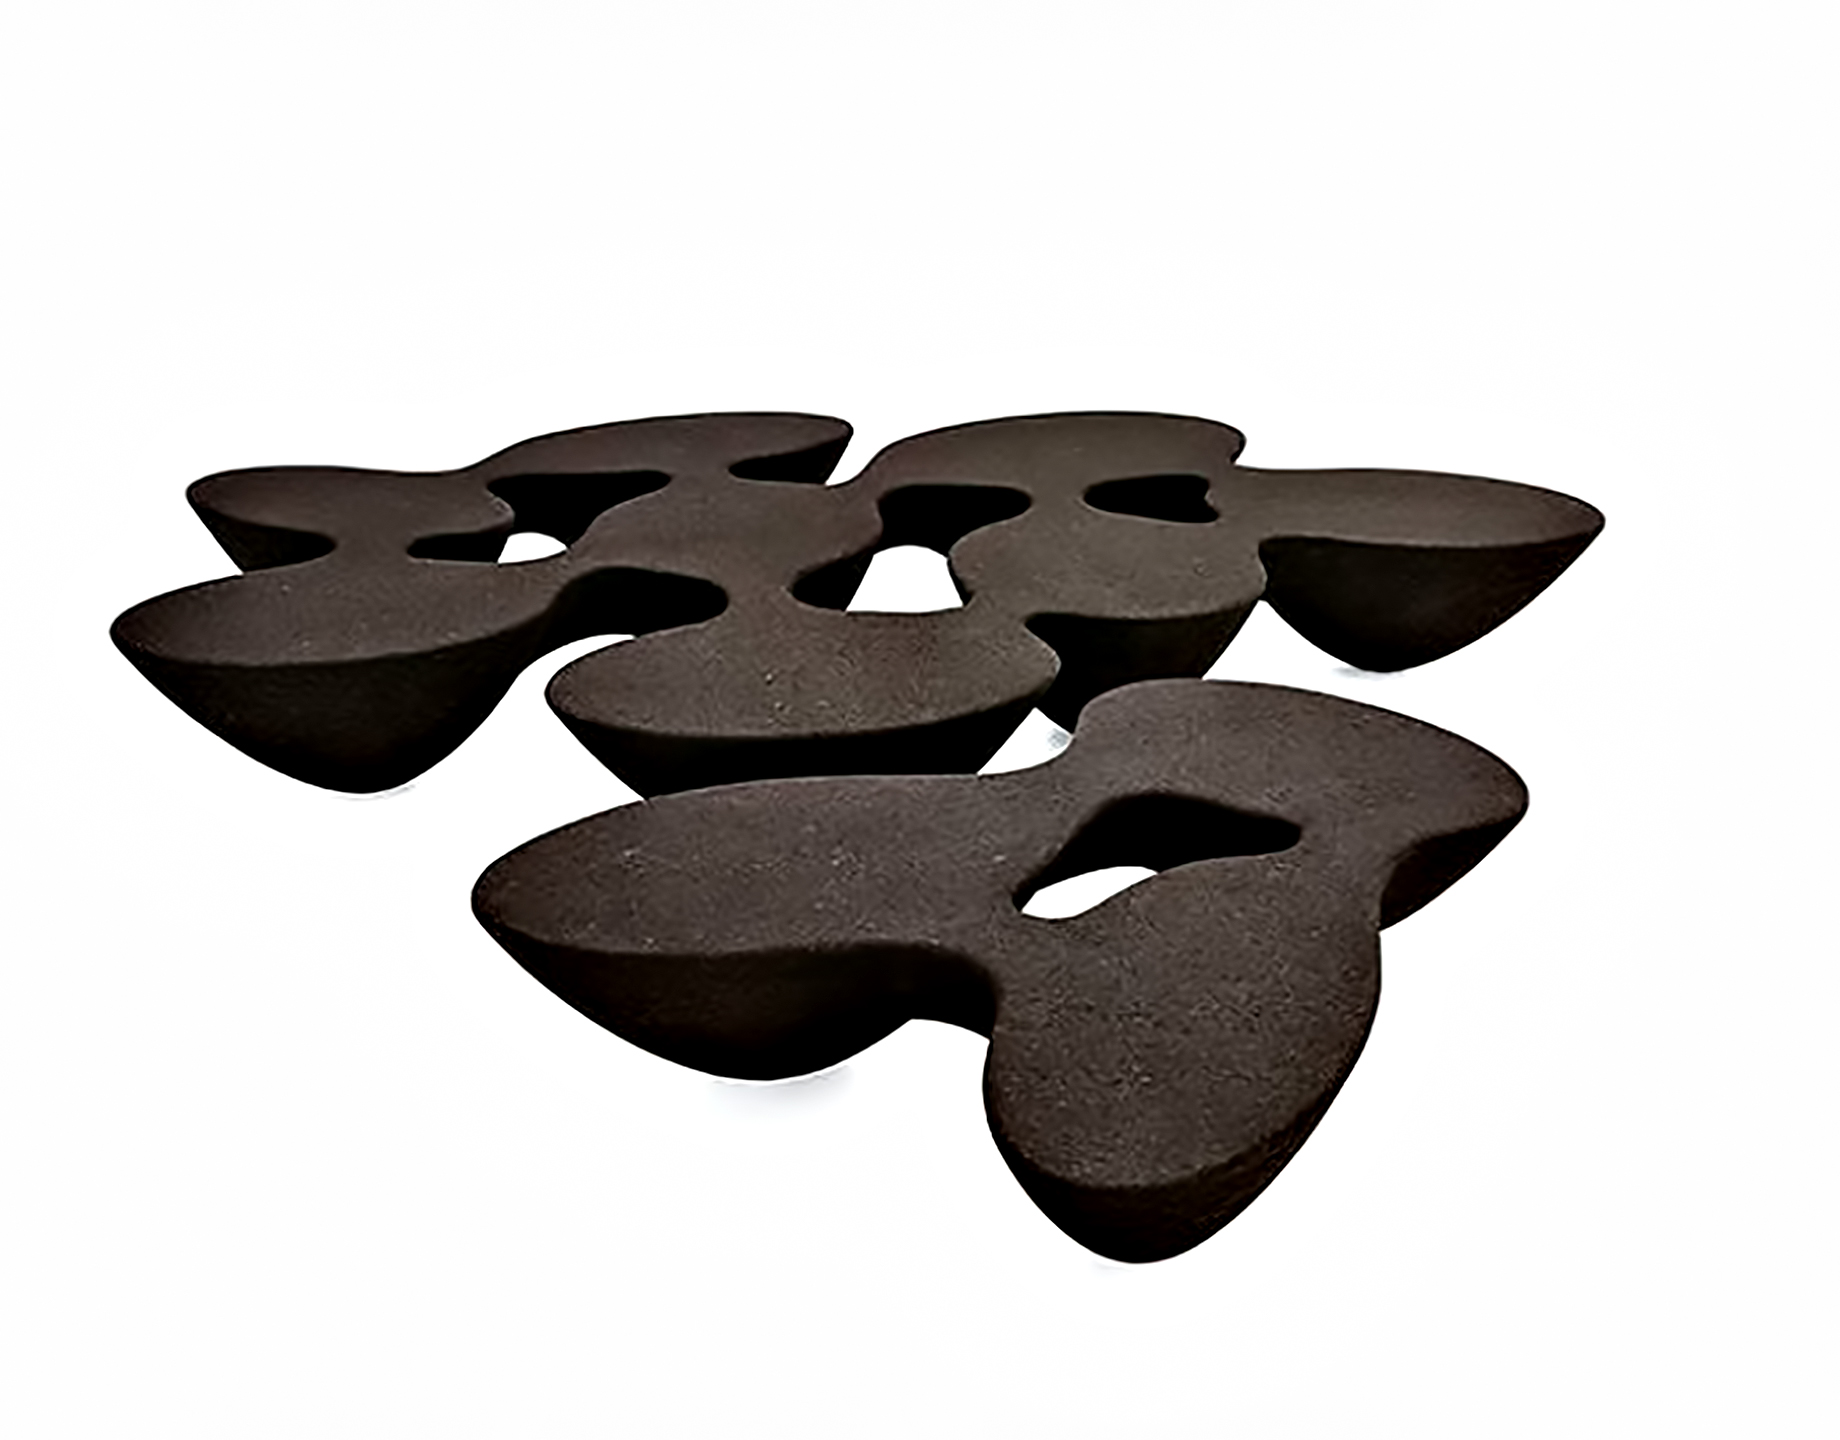 Fluid and Organic Limited Edition Quark Cork Coffee Table Series